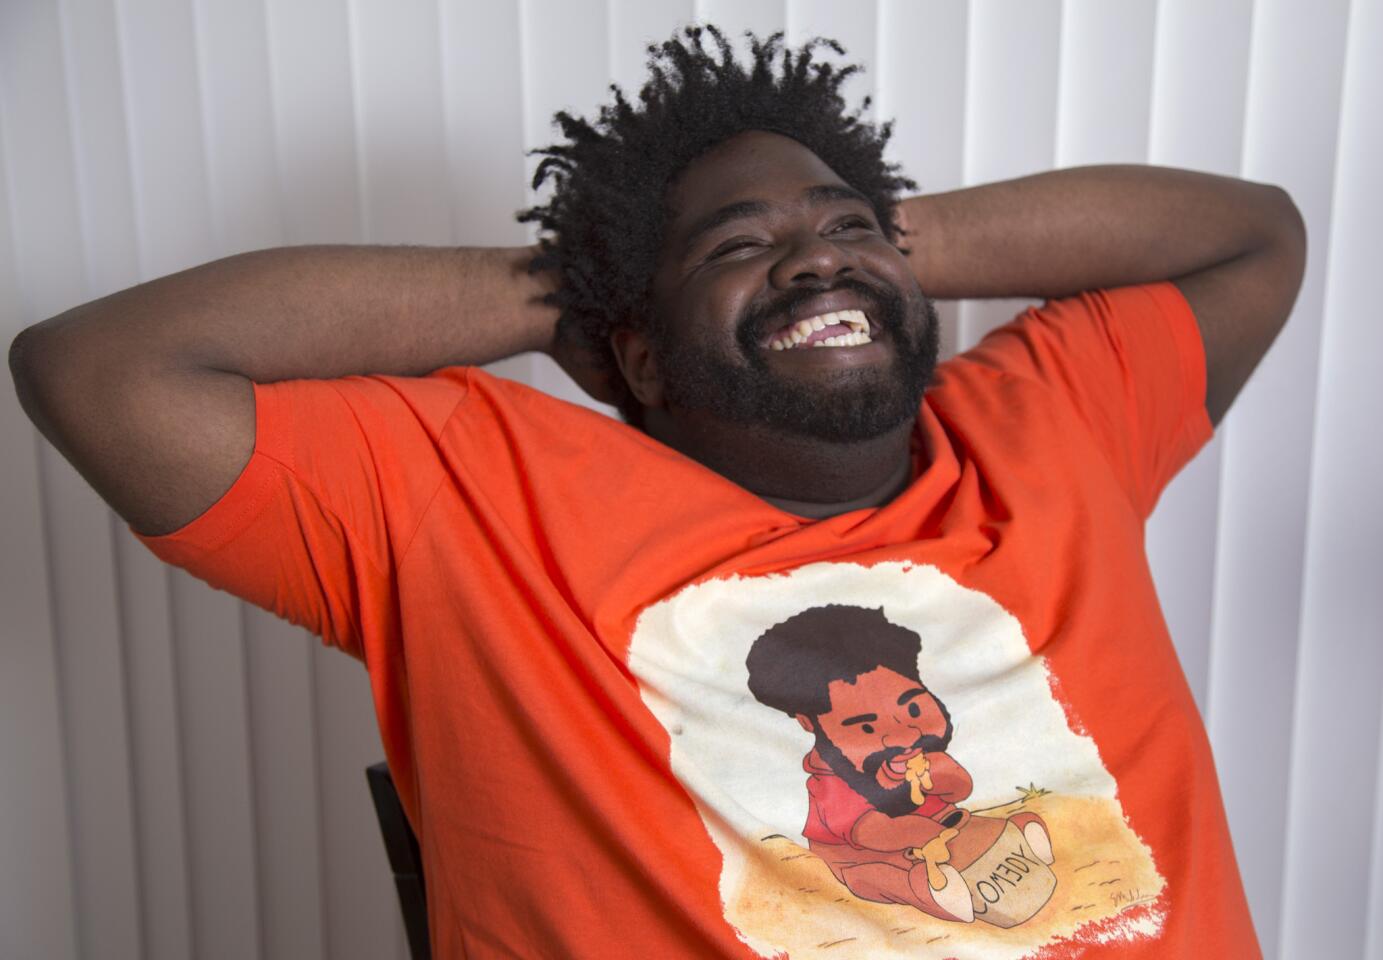 Comedian Ron Funches at his home in Glendale, Calif. Stand-up comedian Ron Funches plays Shelly on the new NBC sitcom, "Undateable."